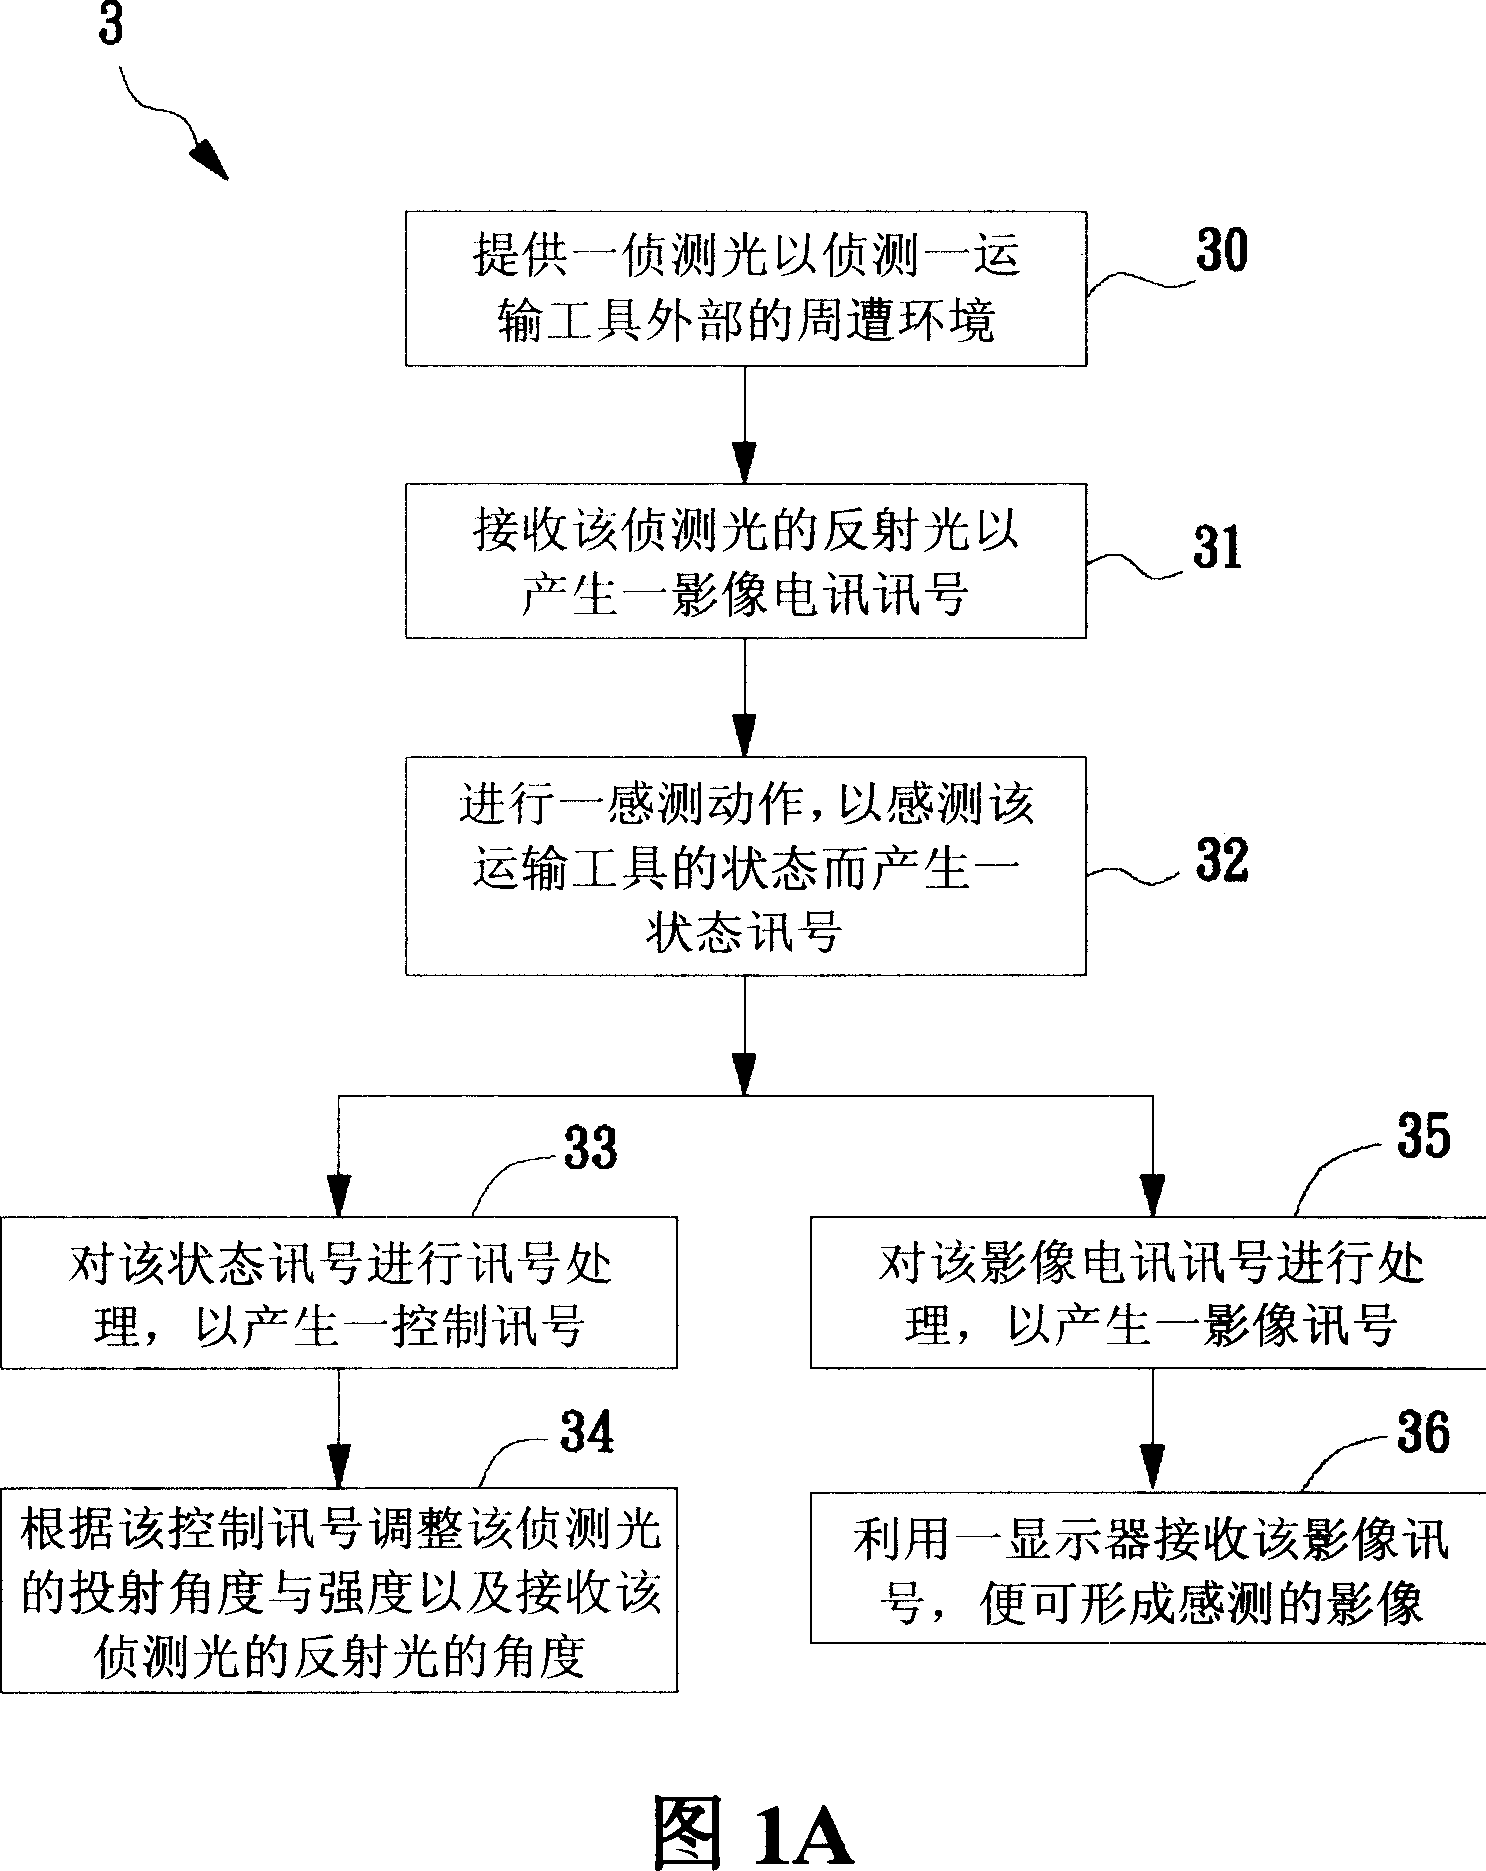 Vehicle assisted monitoring apparatus and method